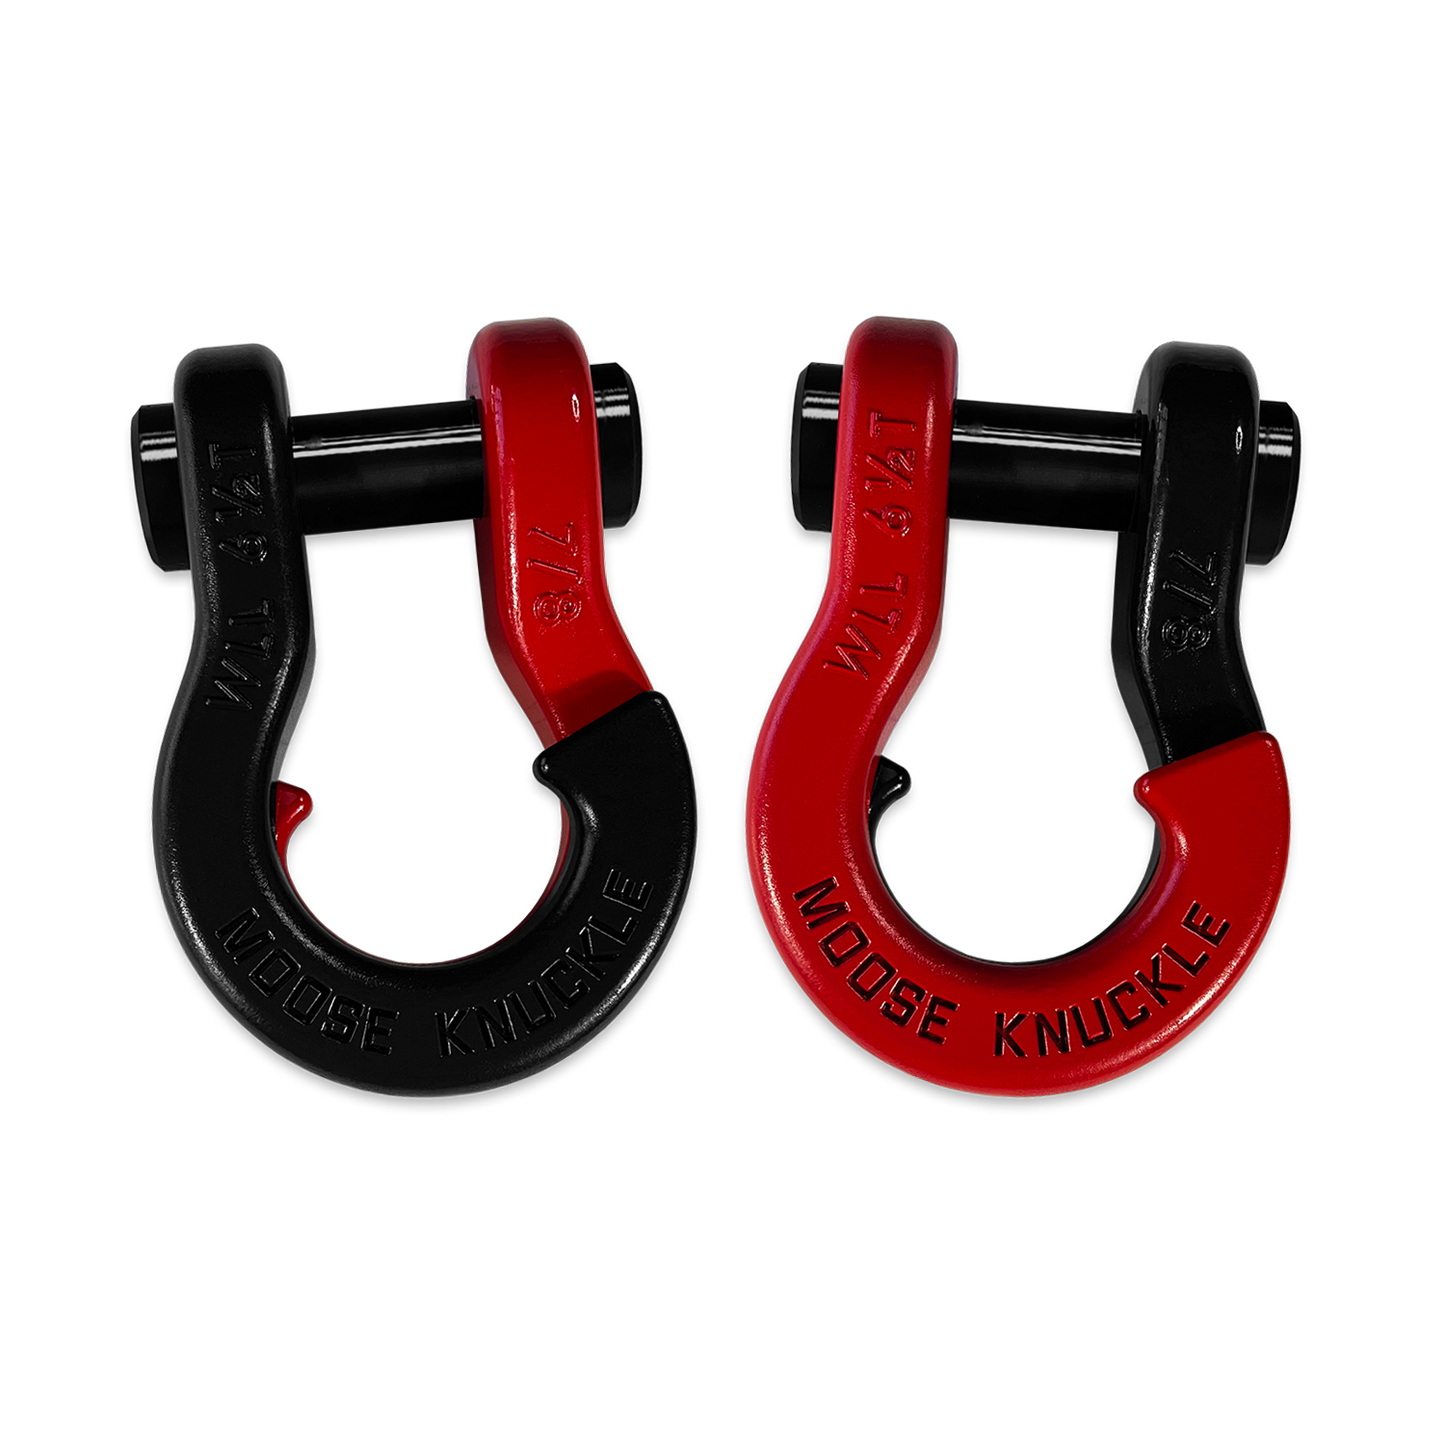 Jowl Recovery Split Shackle 7/8 (Black Hole and Flame Red)